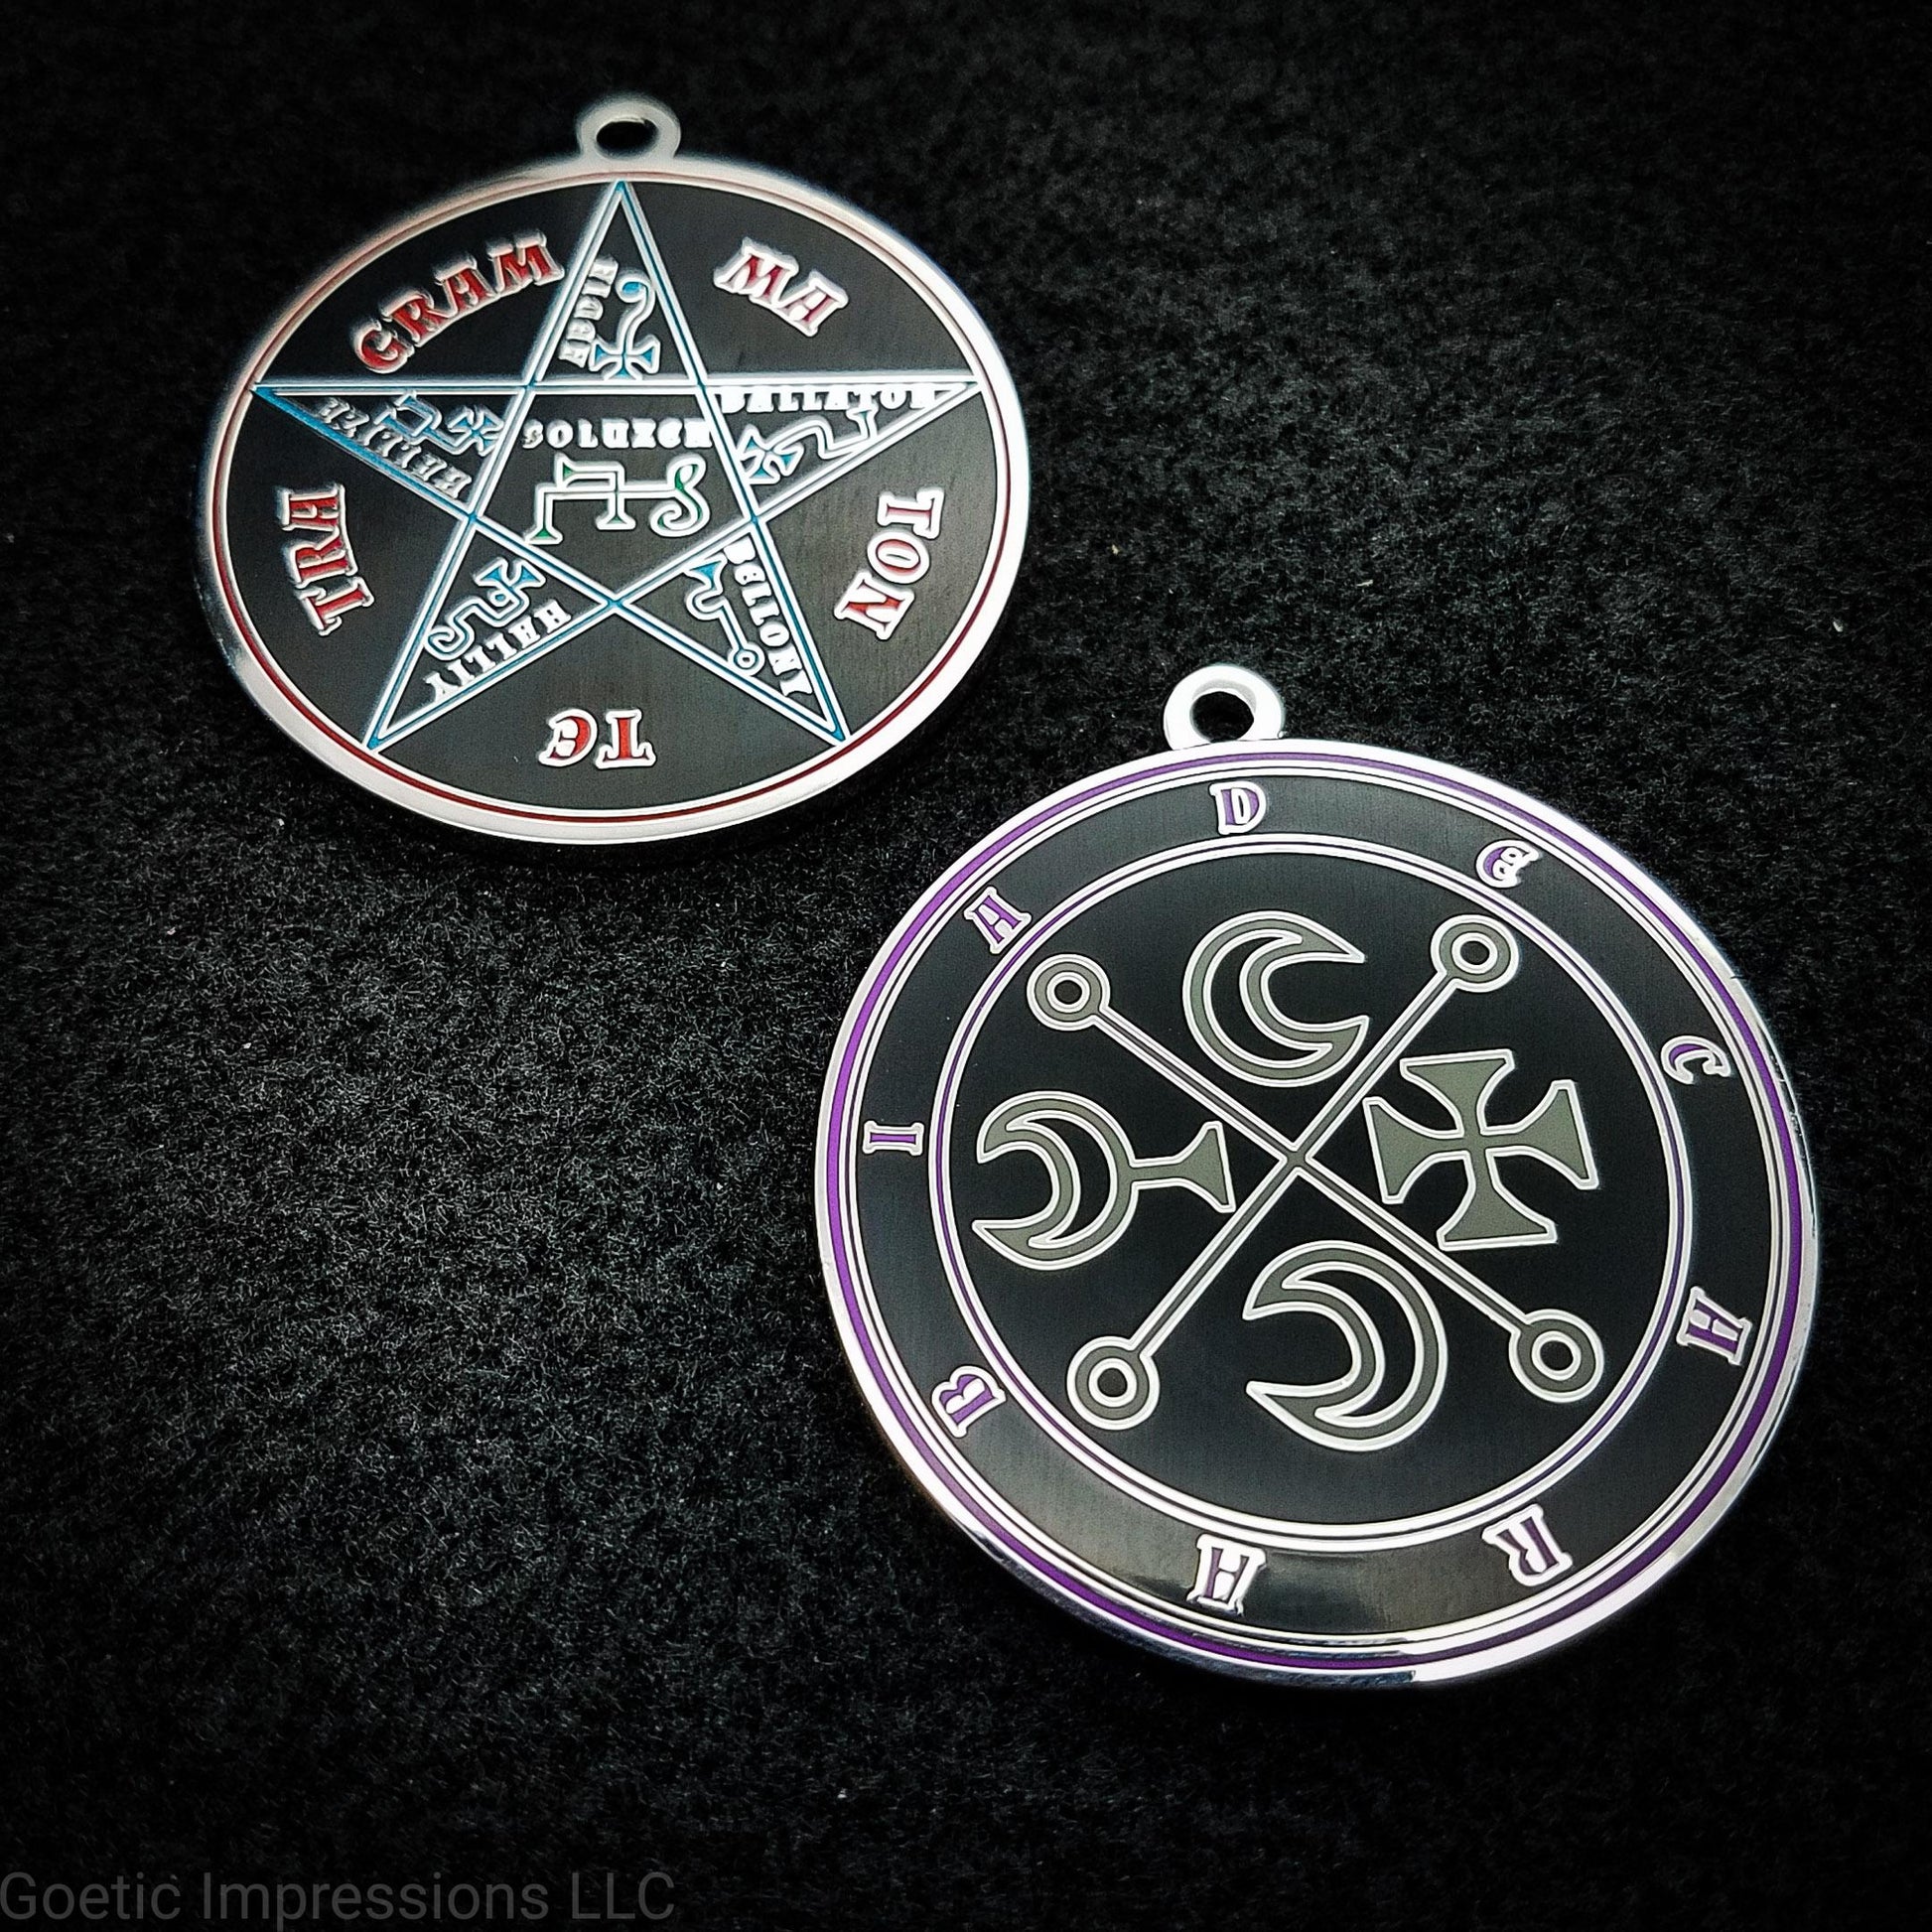 Decarabia sigil pendant with pentacle of solomon on reverse side